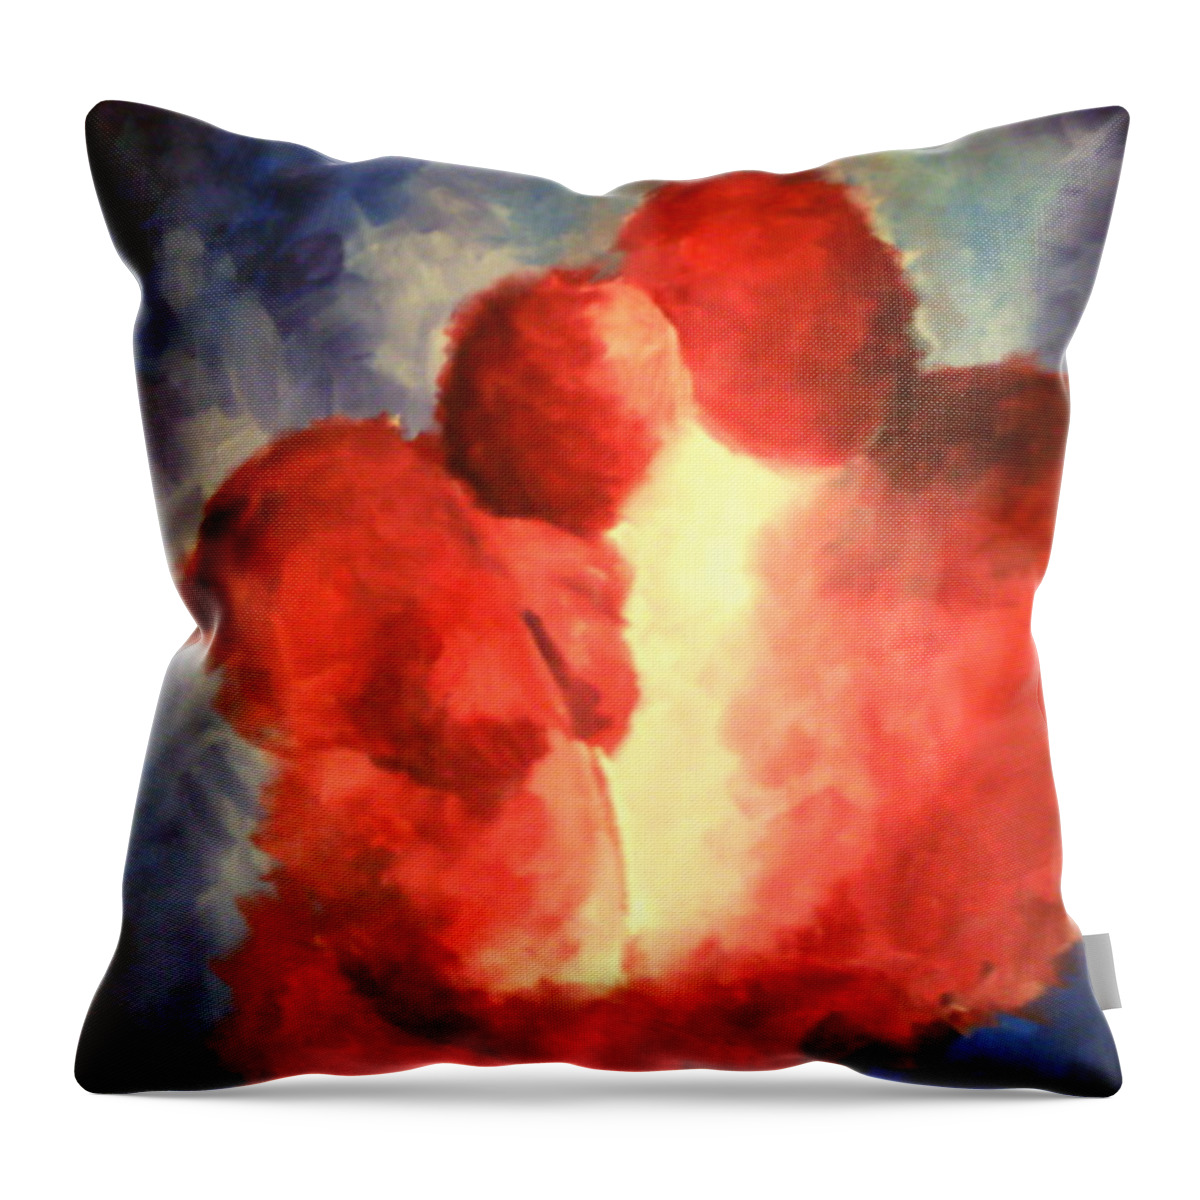 Husband Throw Pillow featuring the painting To Have and To Hold by Jennifer Hannigan-Green